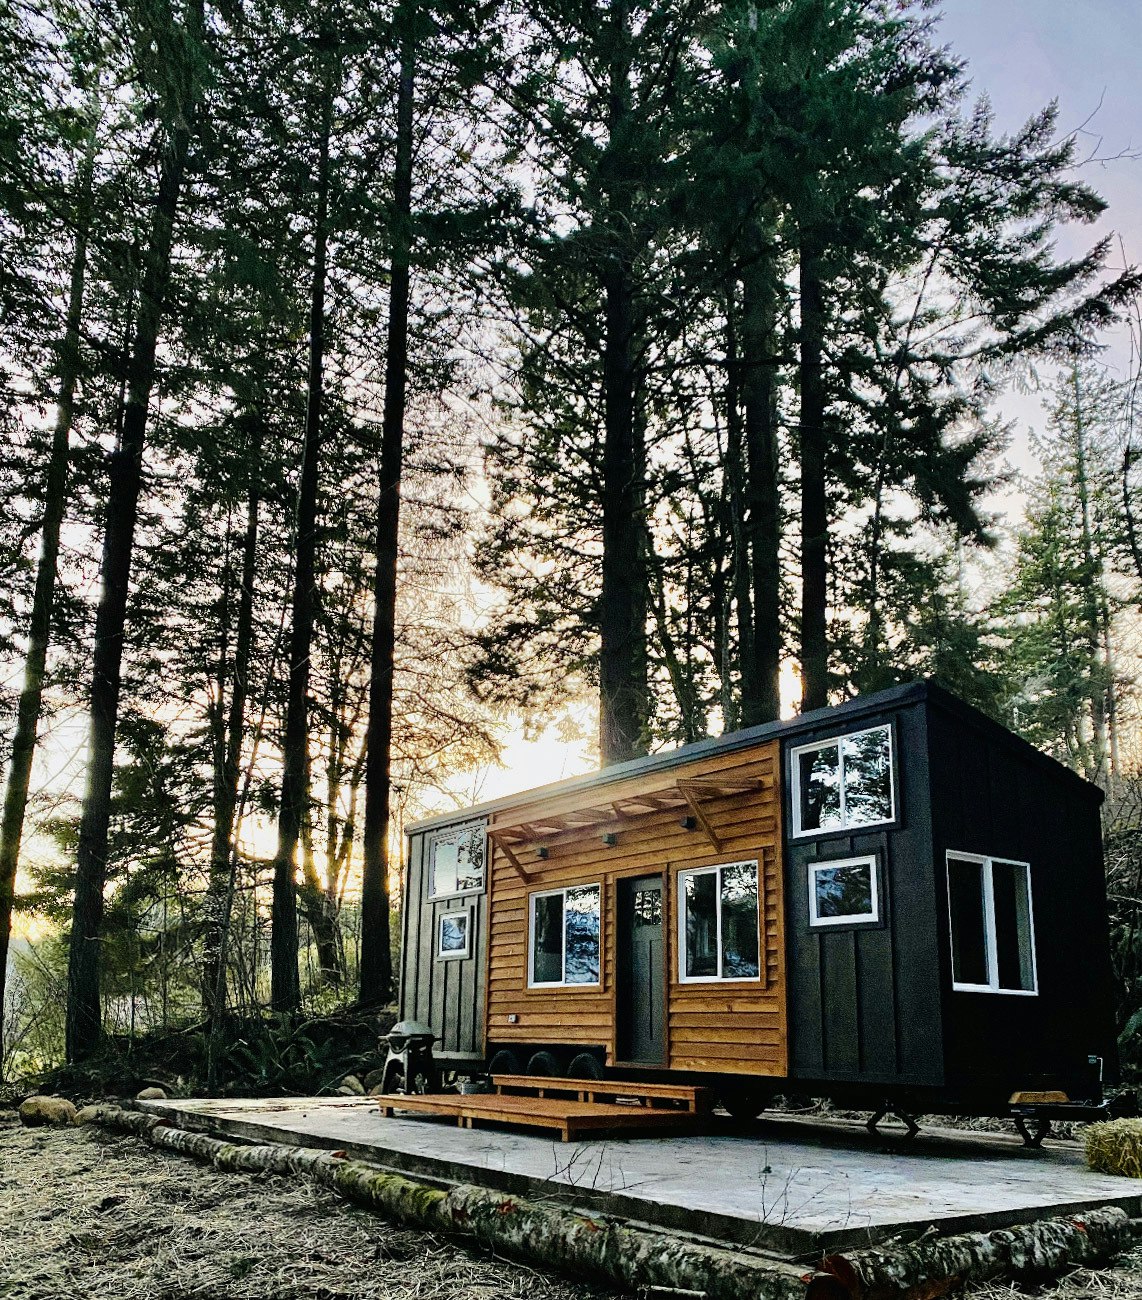 A 'Scandinese' tiny home is for sale in Portland